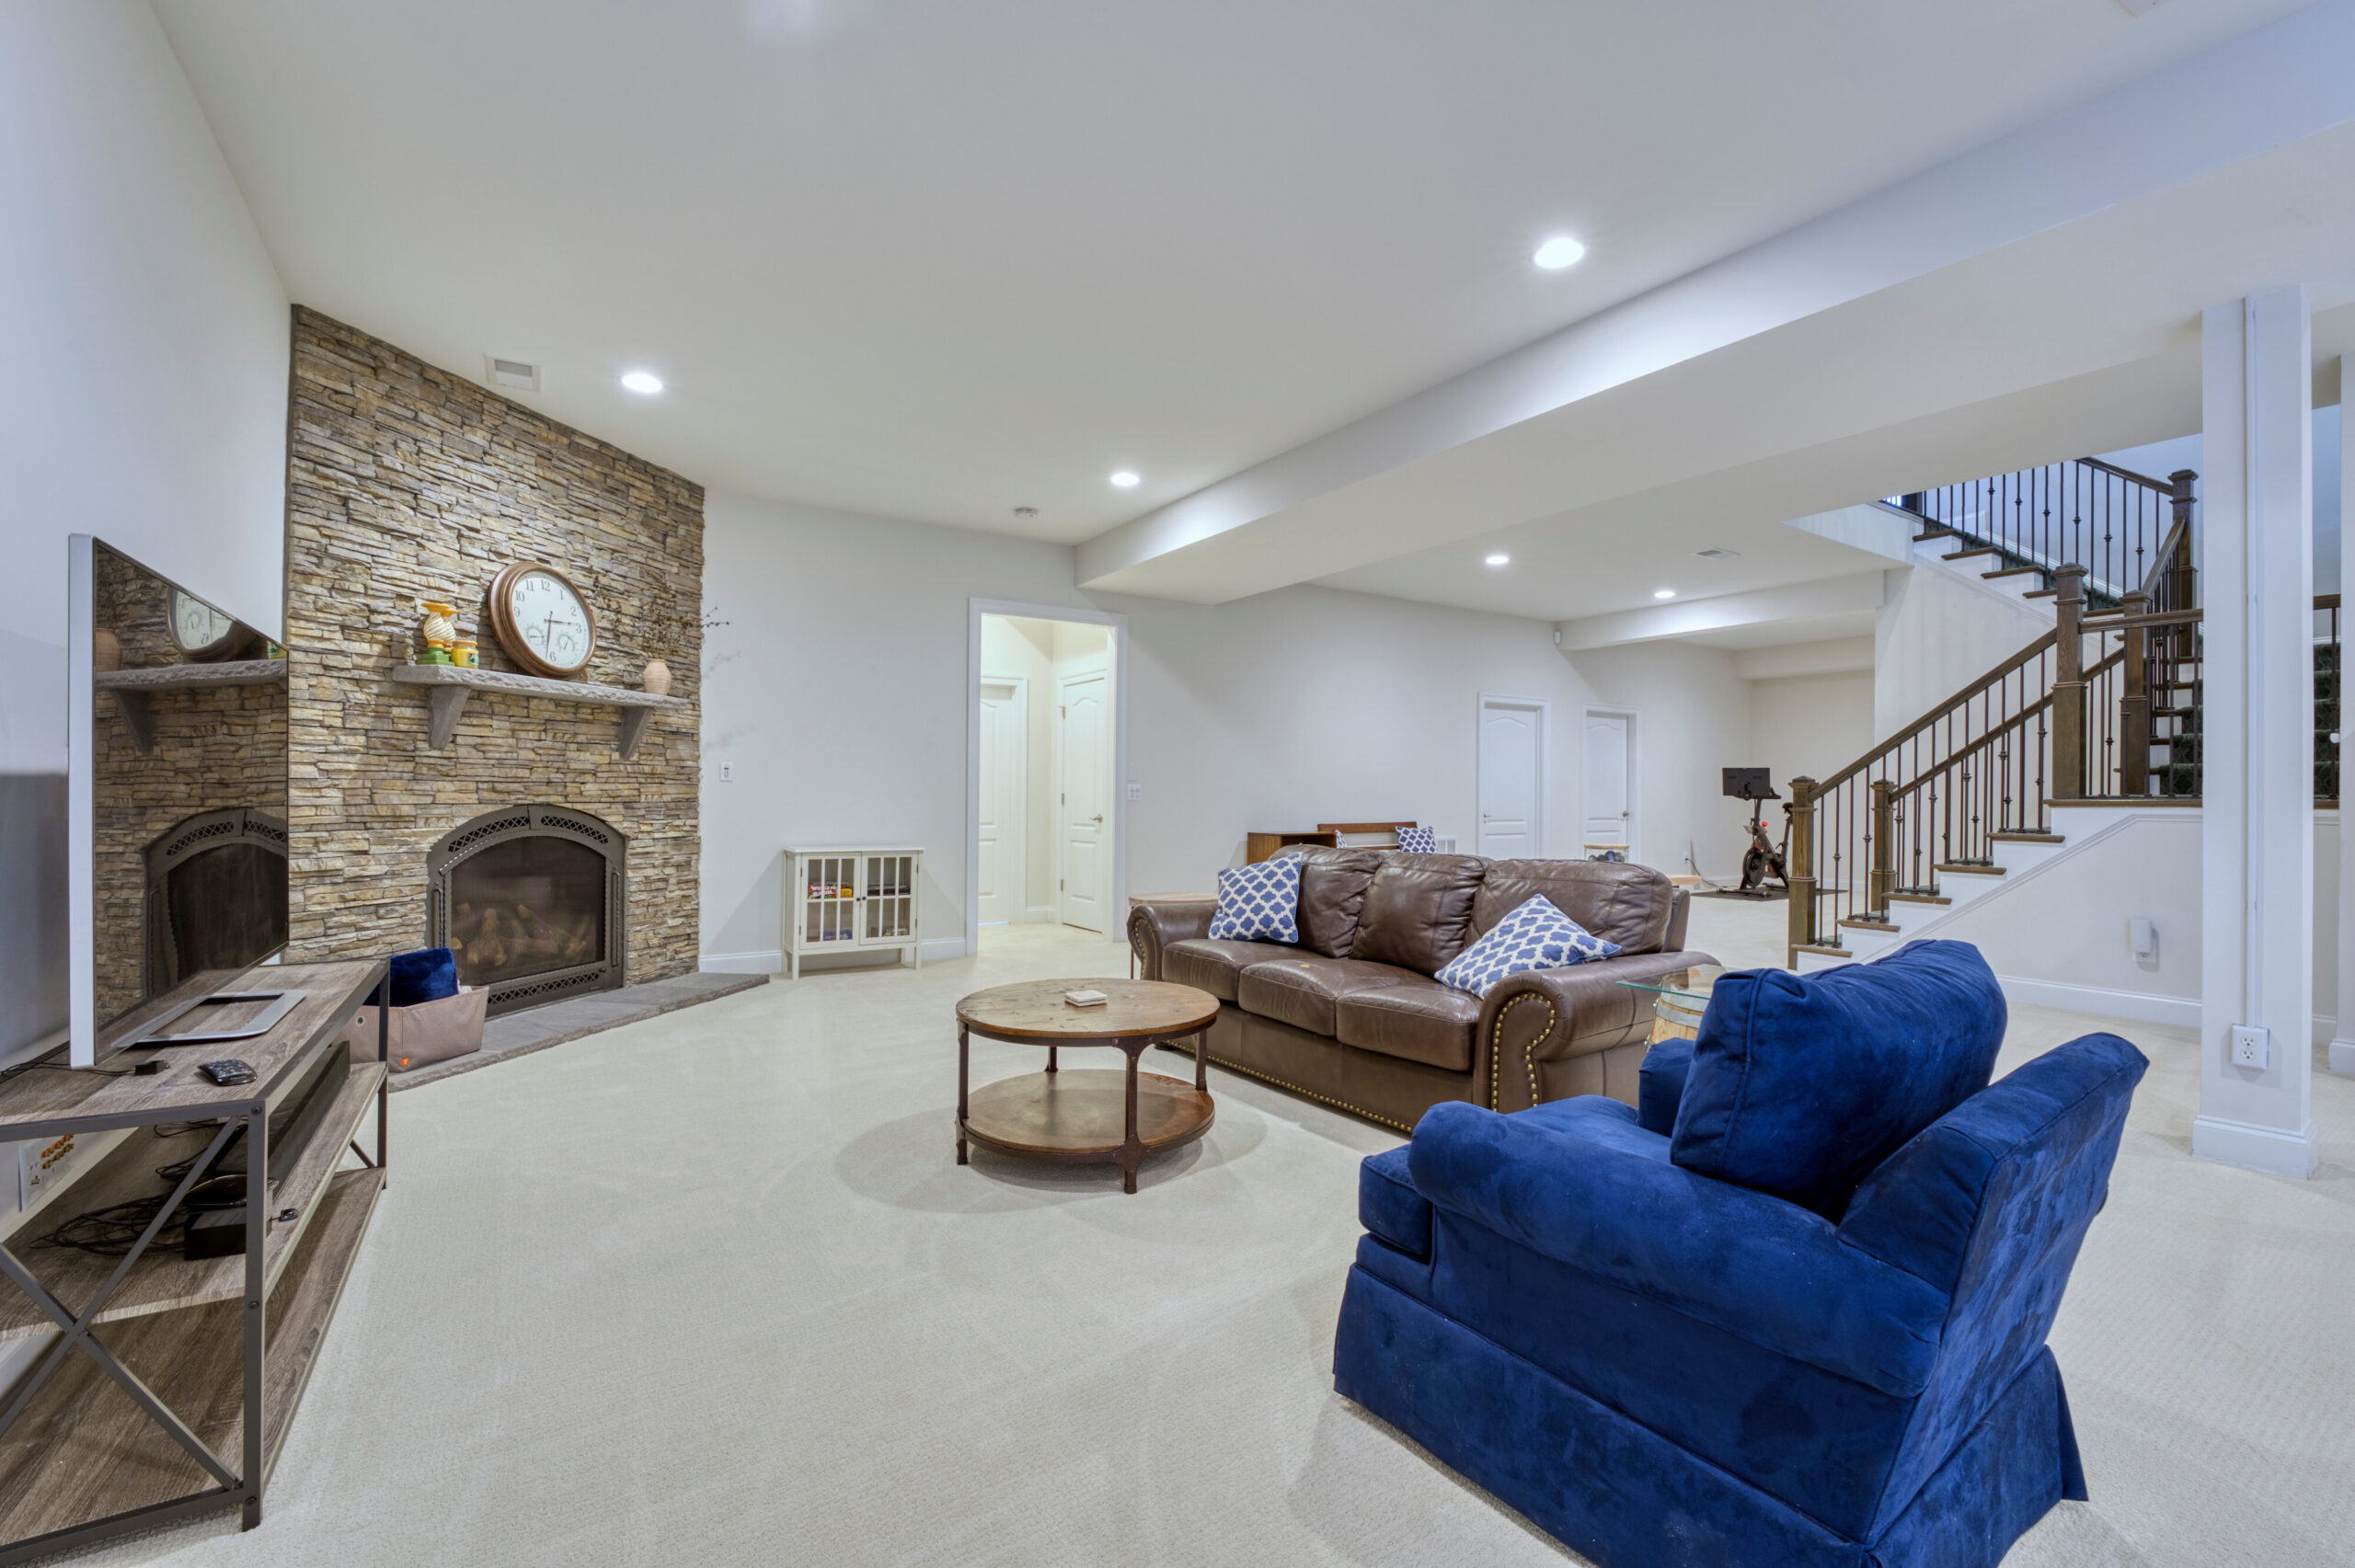 23734 Heather Mews Dr, Ashburn - professional interior photo showing large open finished basement space, stone floor-to-ceiling fireplace situated in an angled corner